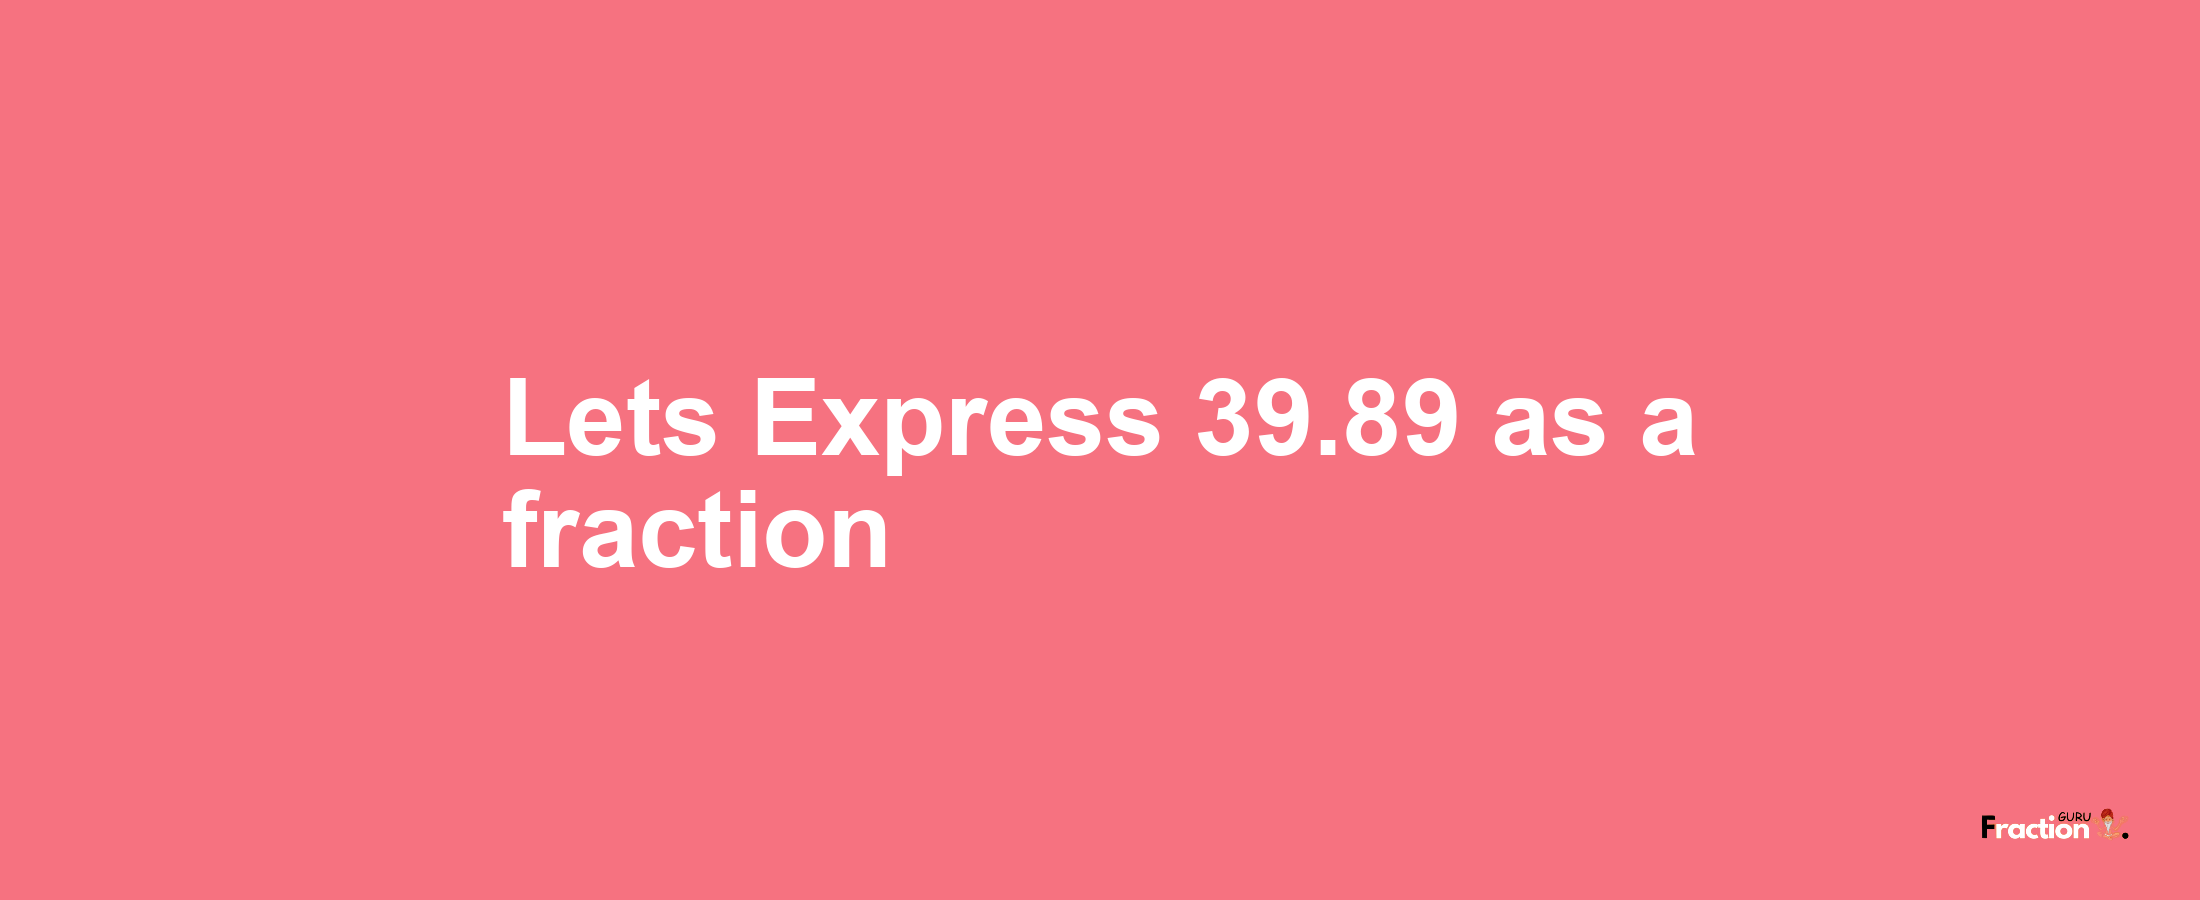 Lets Express 39.89 as afraction